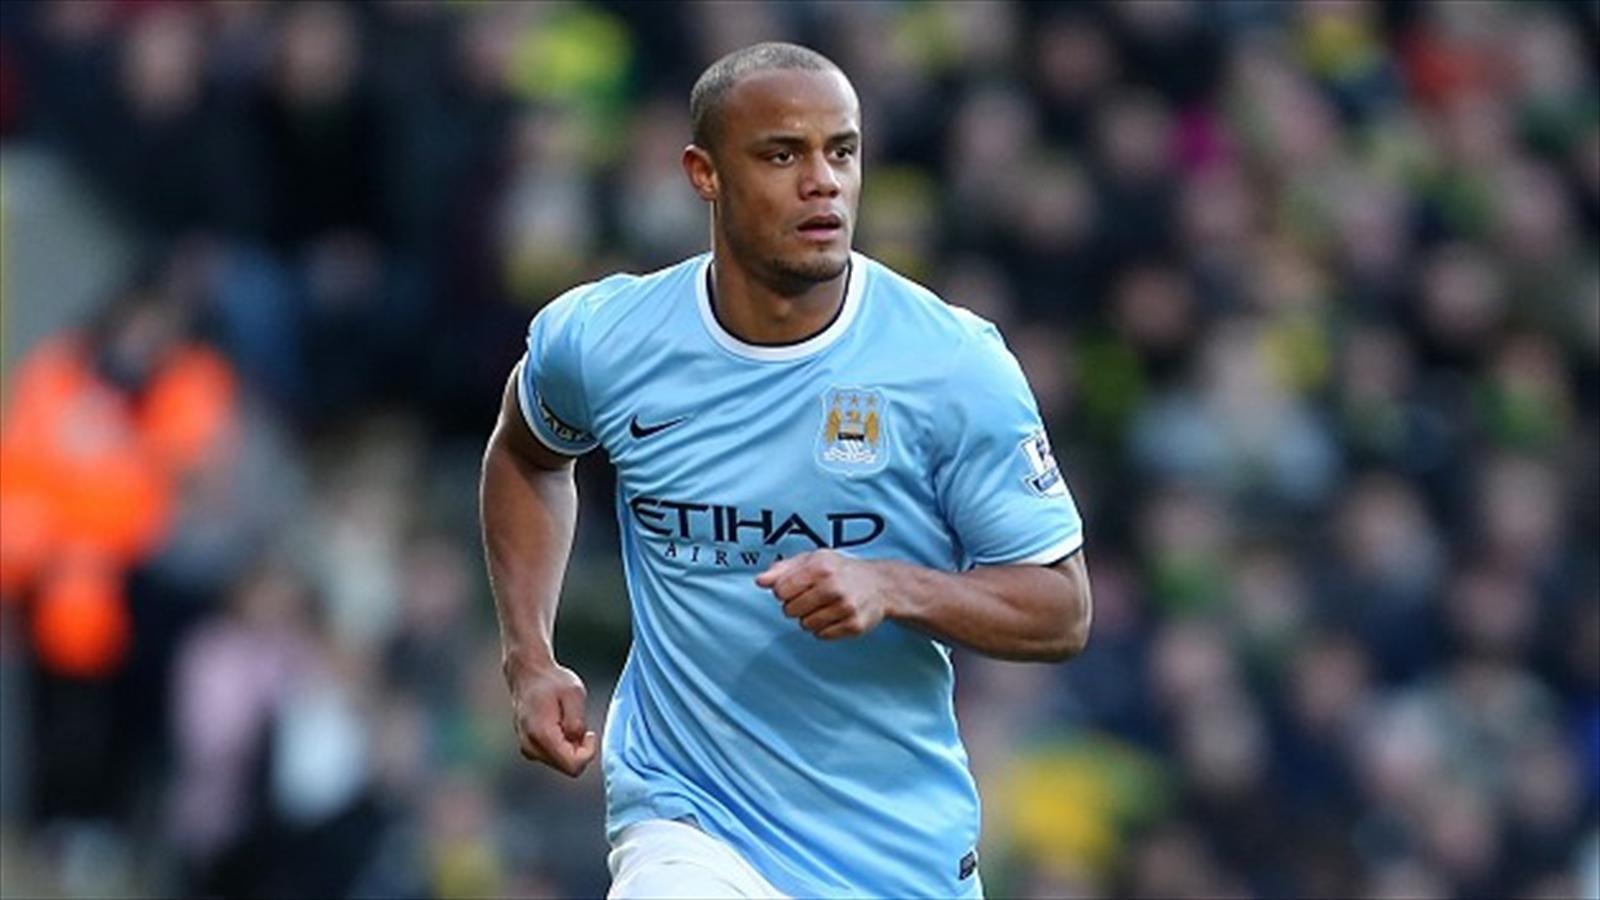 Kompany injured in training, doubtful for Liverpool game